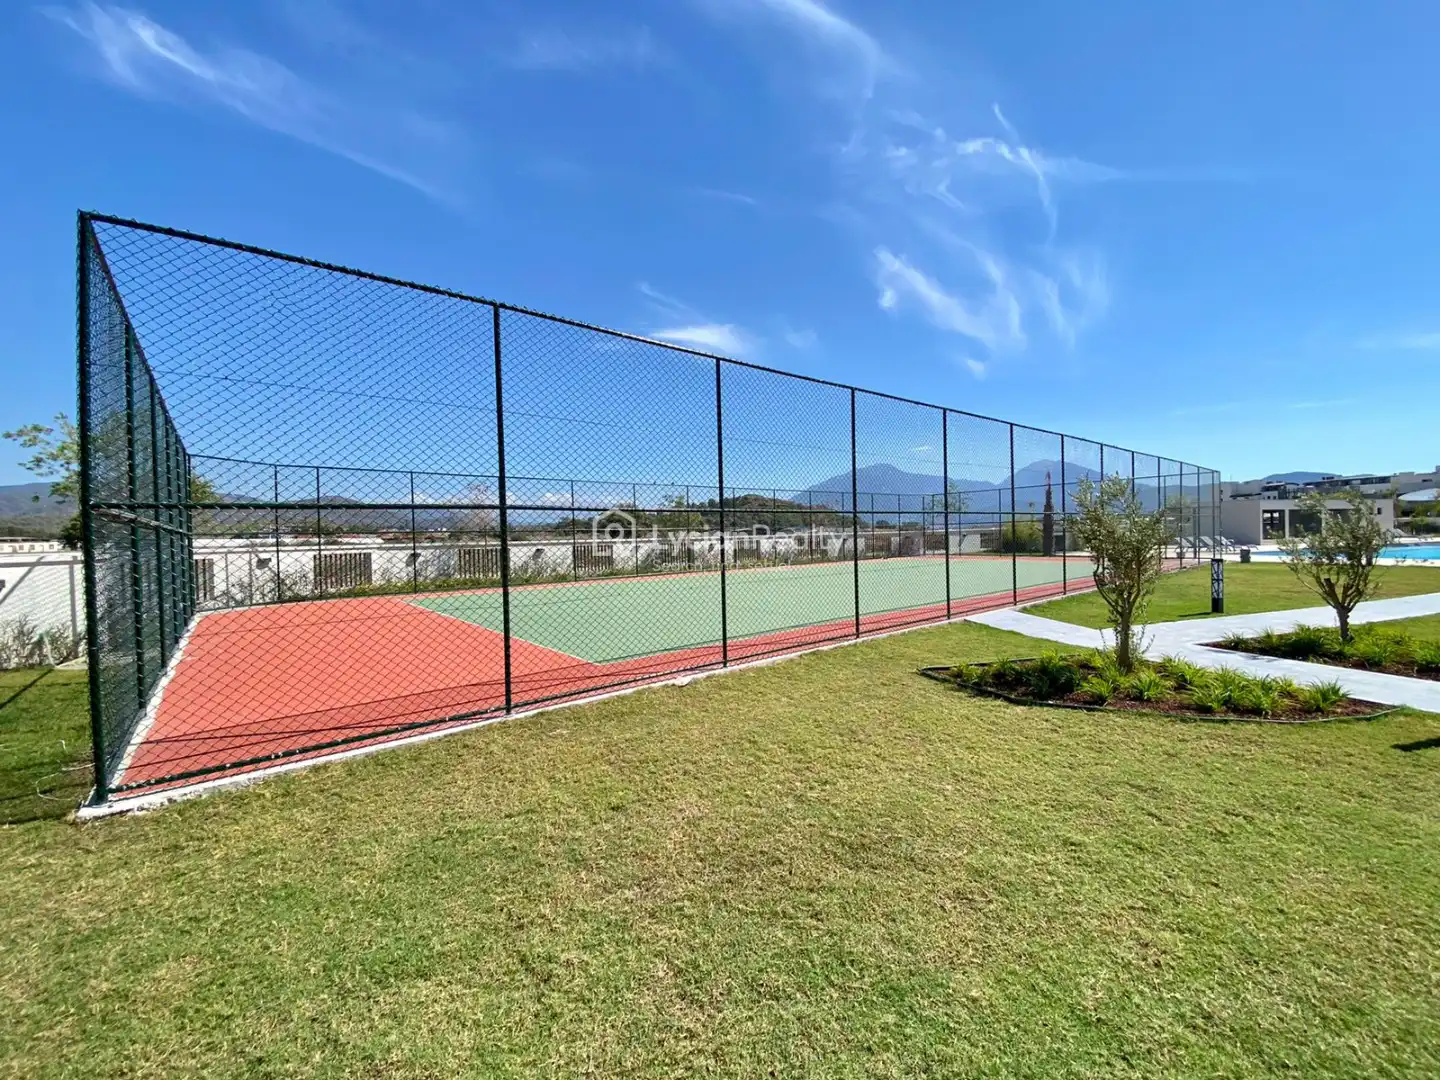 FLAT MAC | Apartment with Pool, Tennis Court